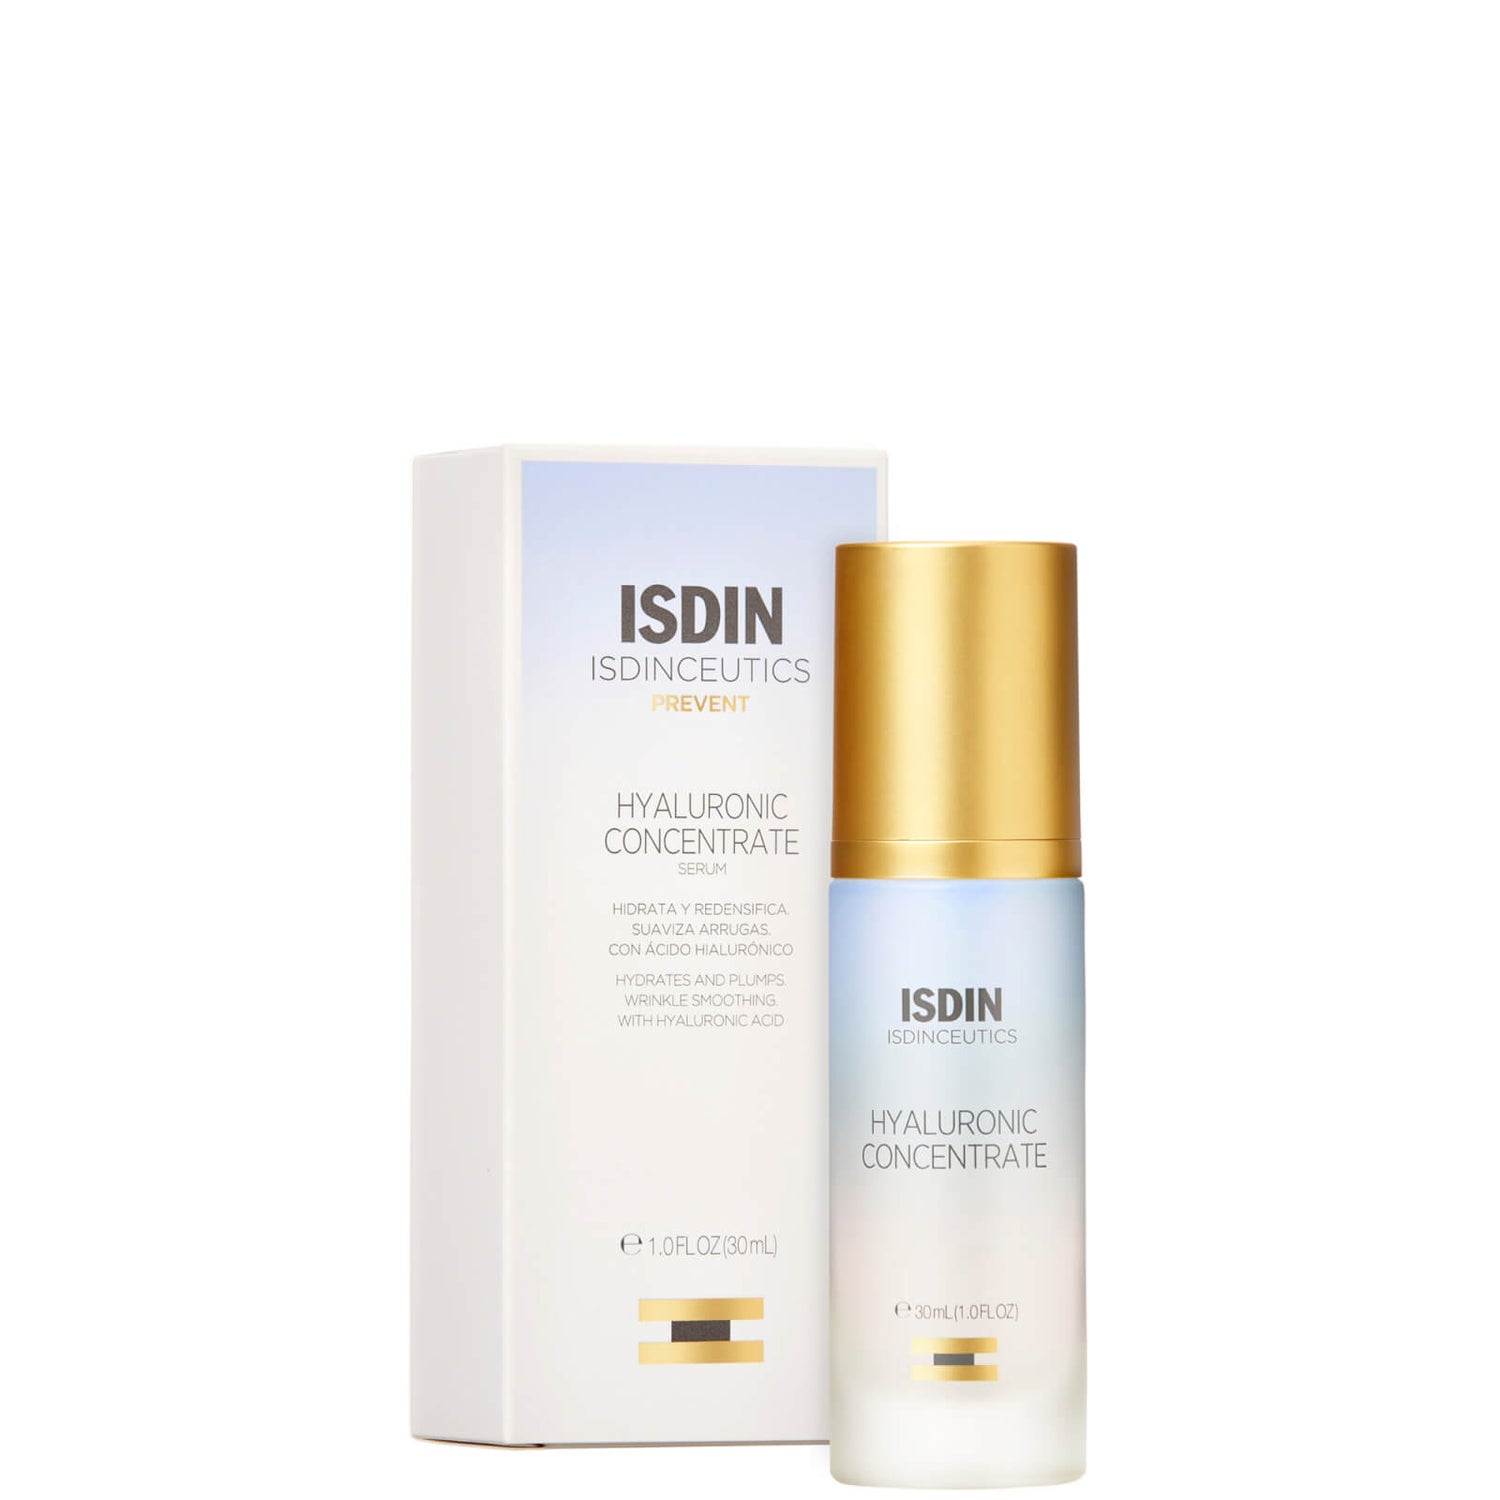 ISDIN ISDINCEUTICS Hyaluronic Concentrate Hydrating Hyaluronic Acid Serum 1 fl. oz